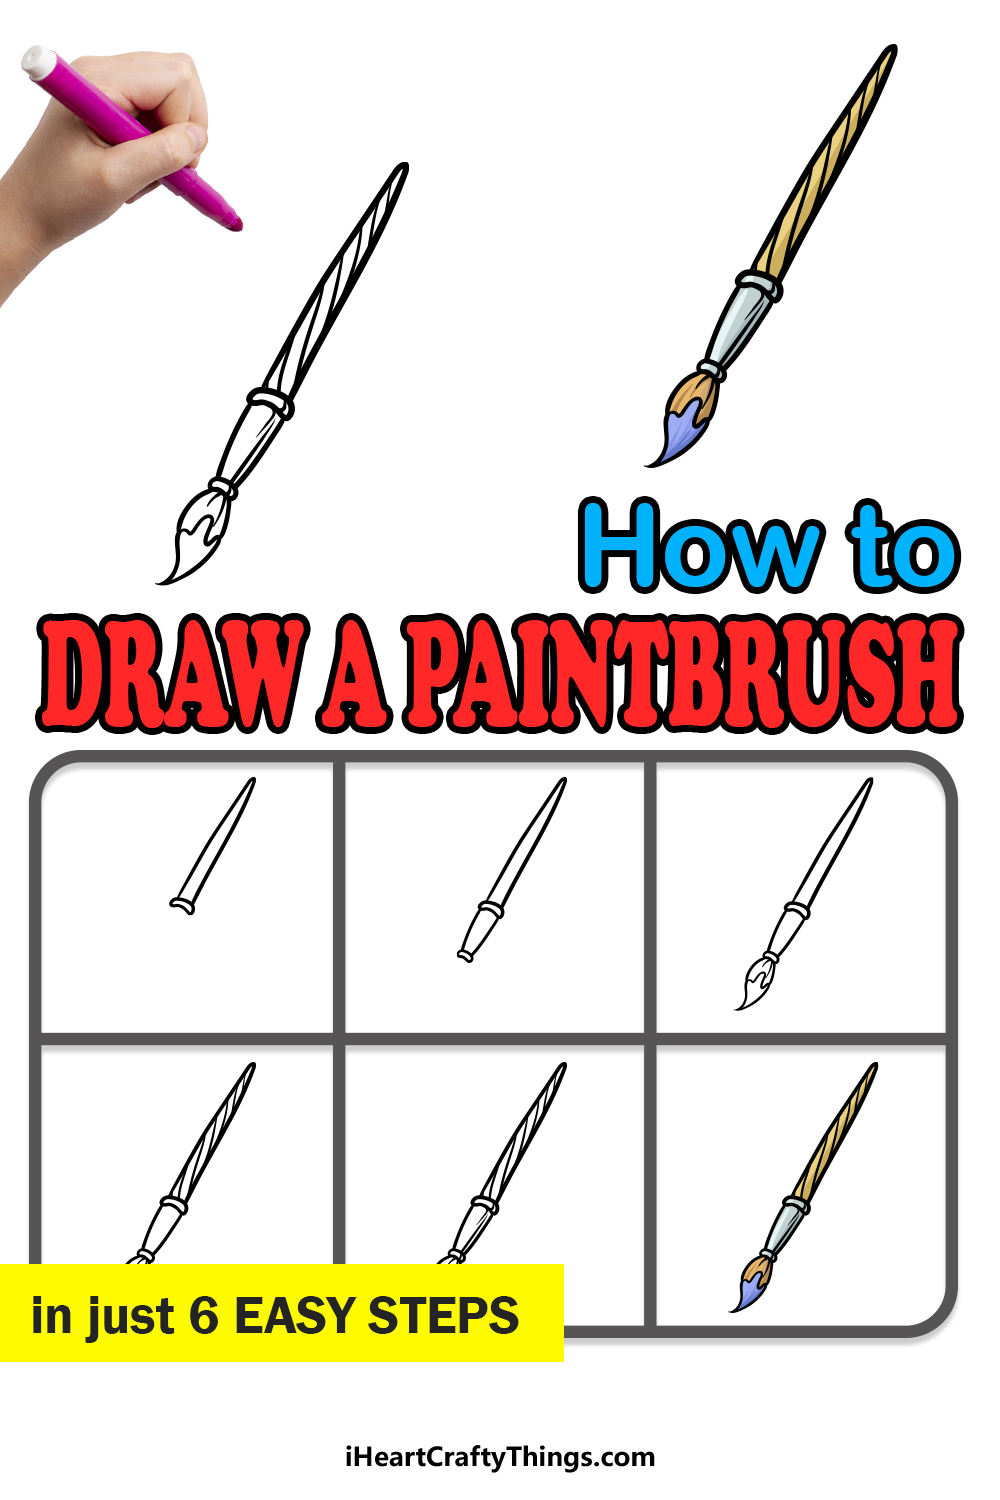 how to draw a paintbrush in 6 easy steps